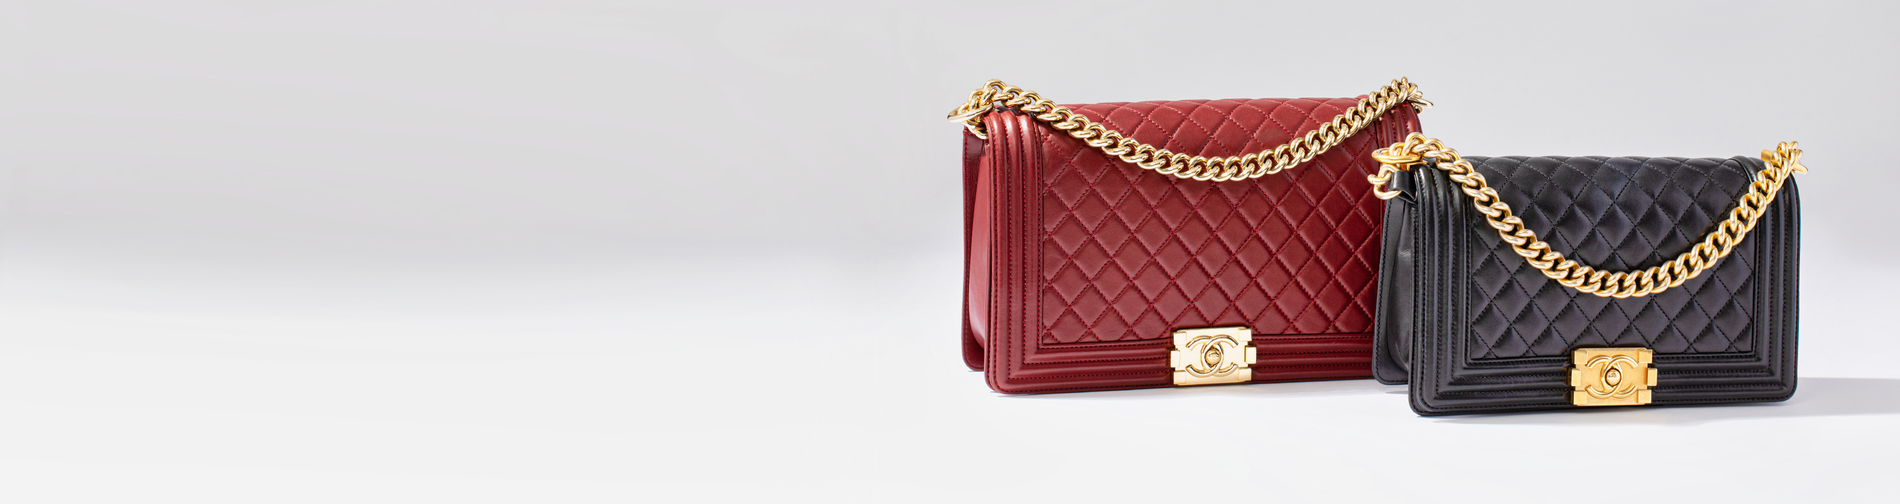 Chanel Bags, Luxury Resale, myGemma – Page 2